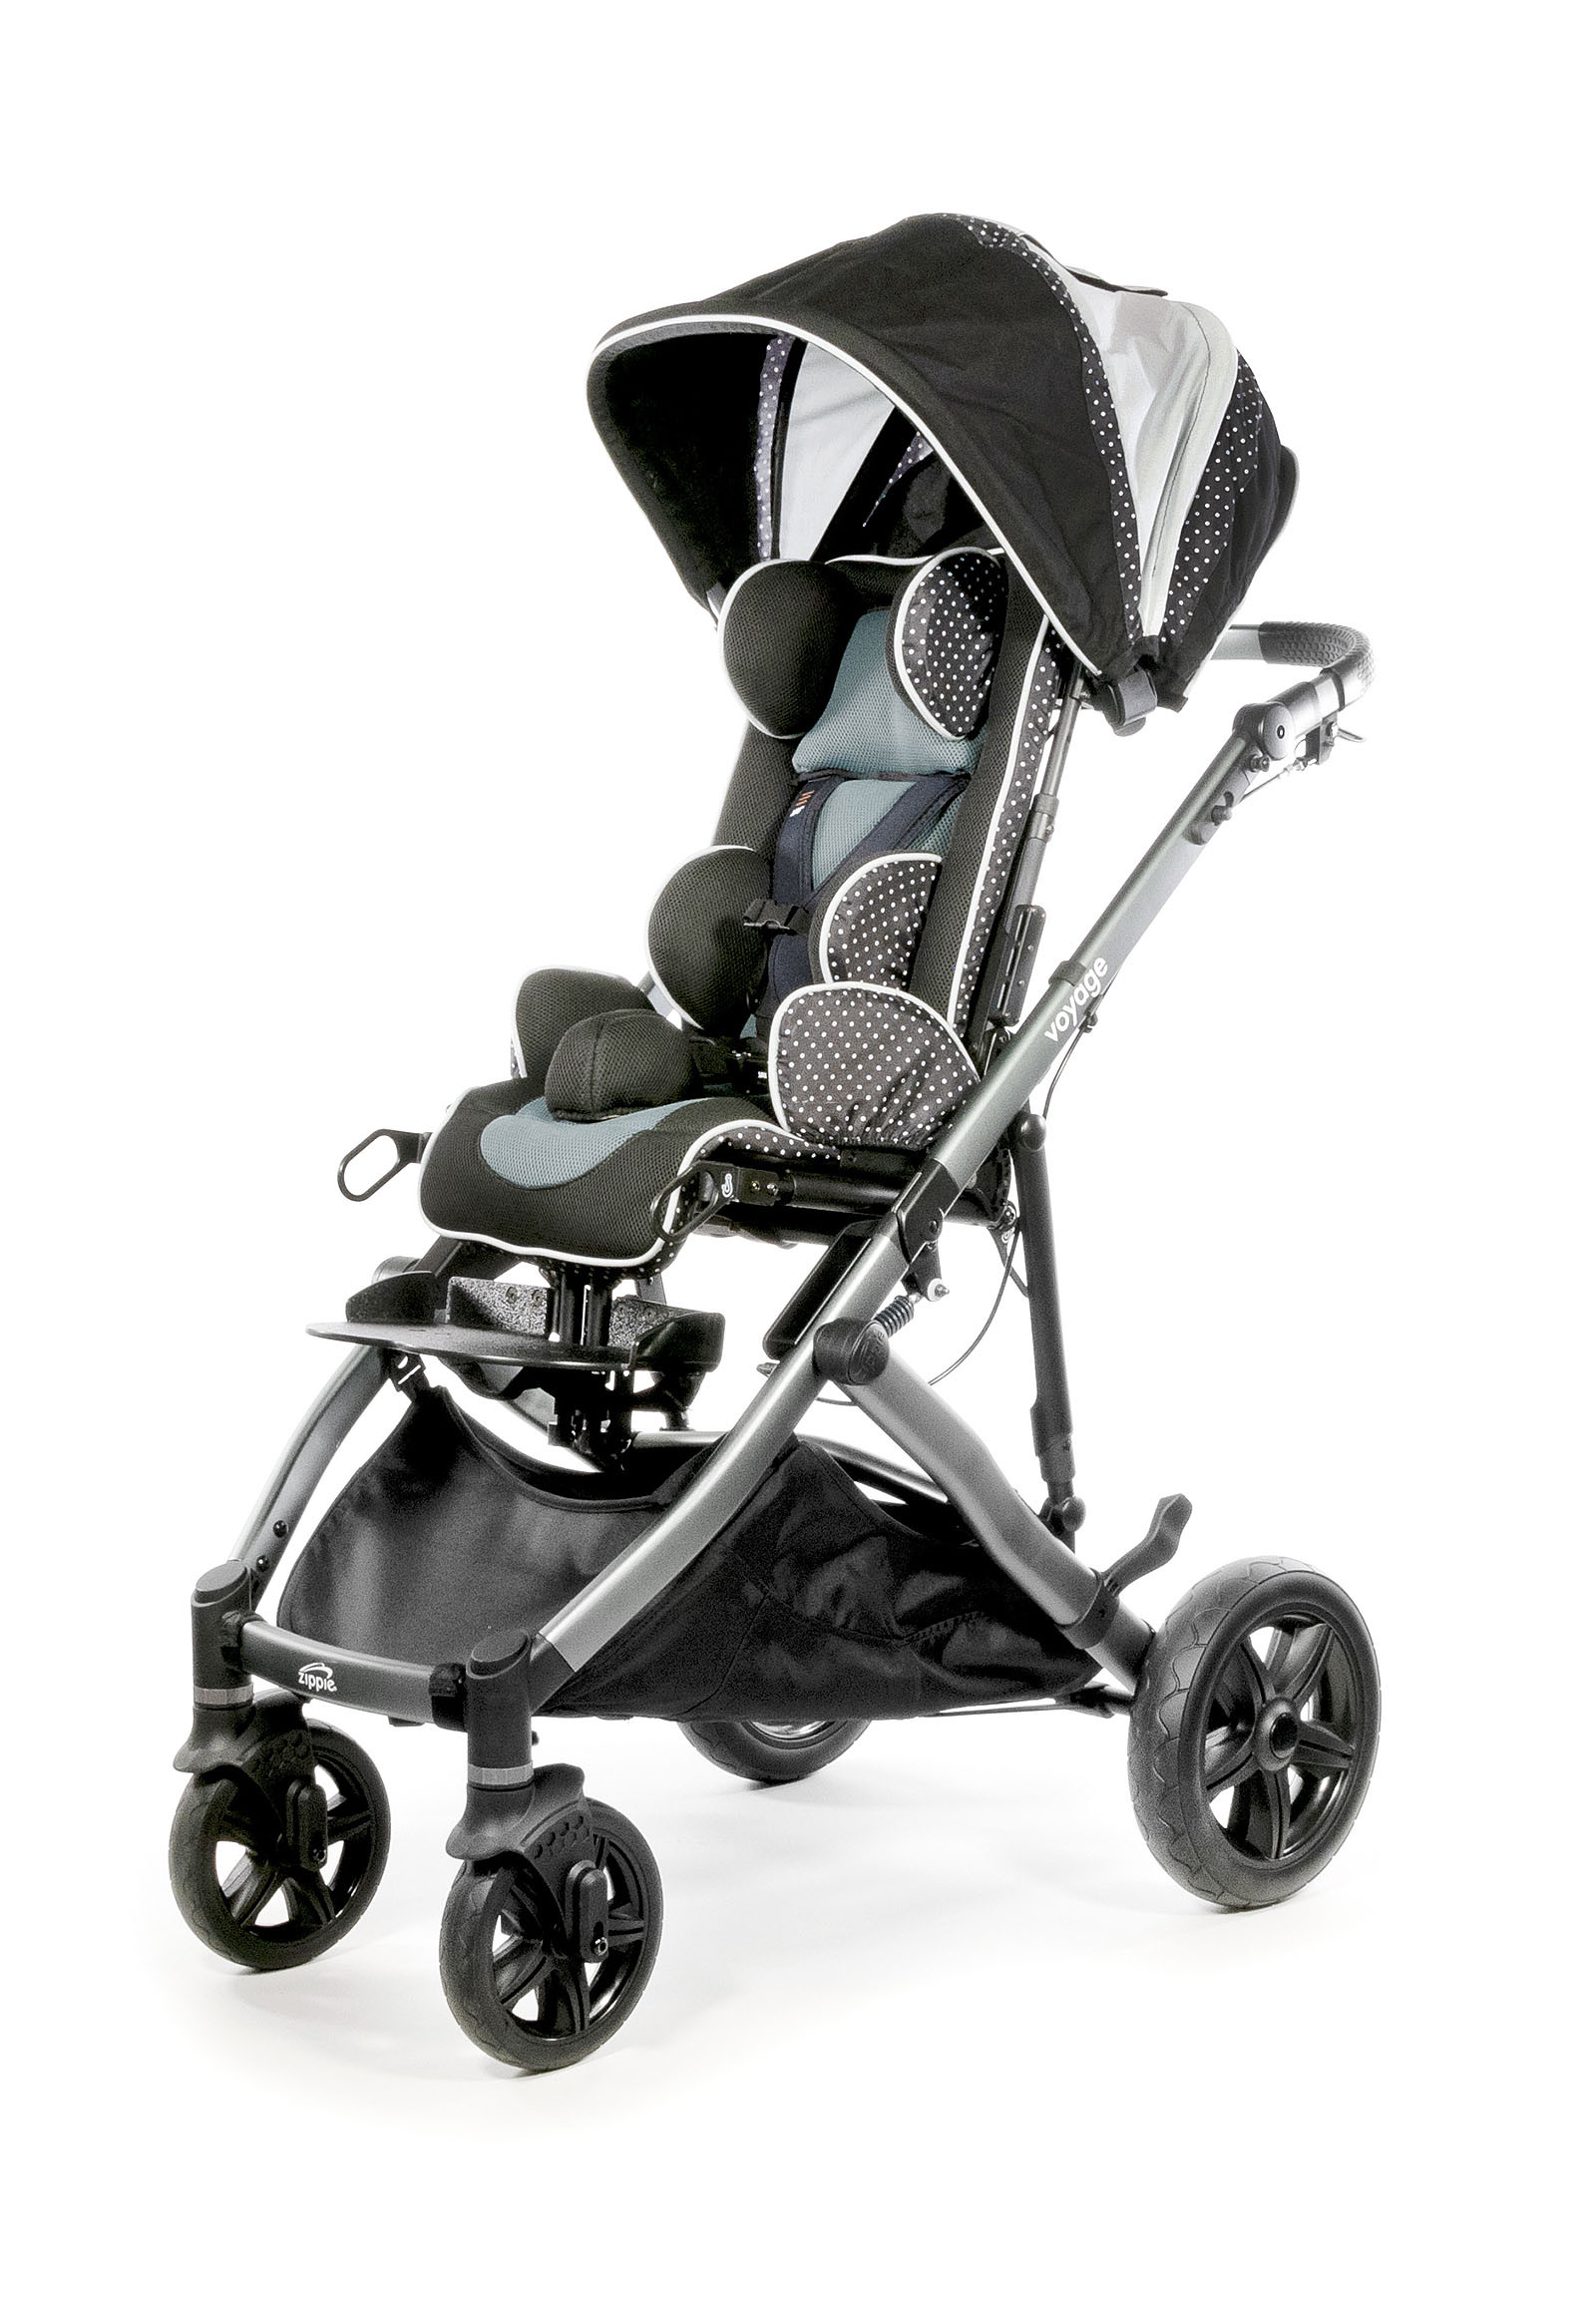 Zippie Voyage Early Intervention Stroller - Moderate Seating - Gray